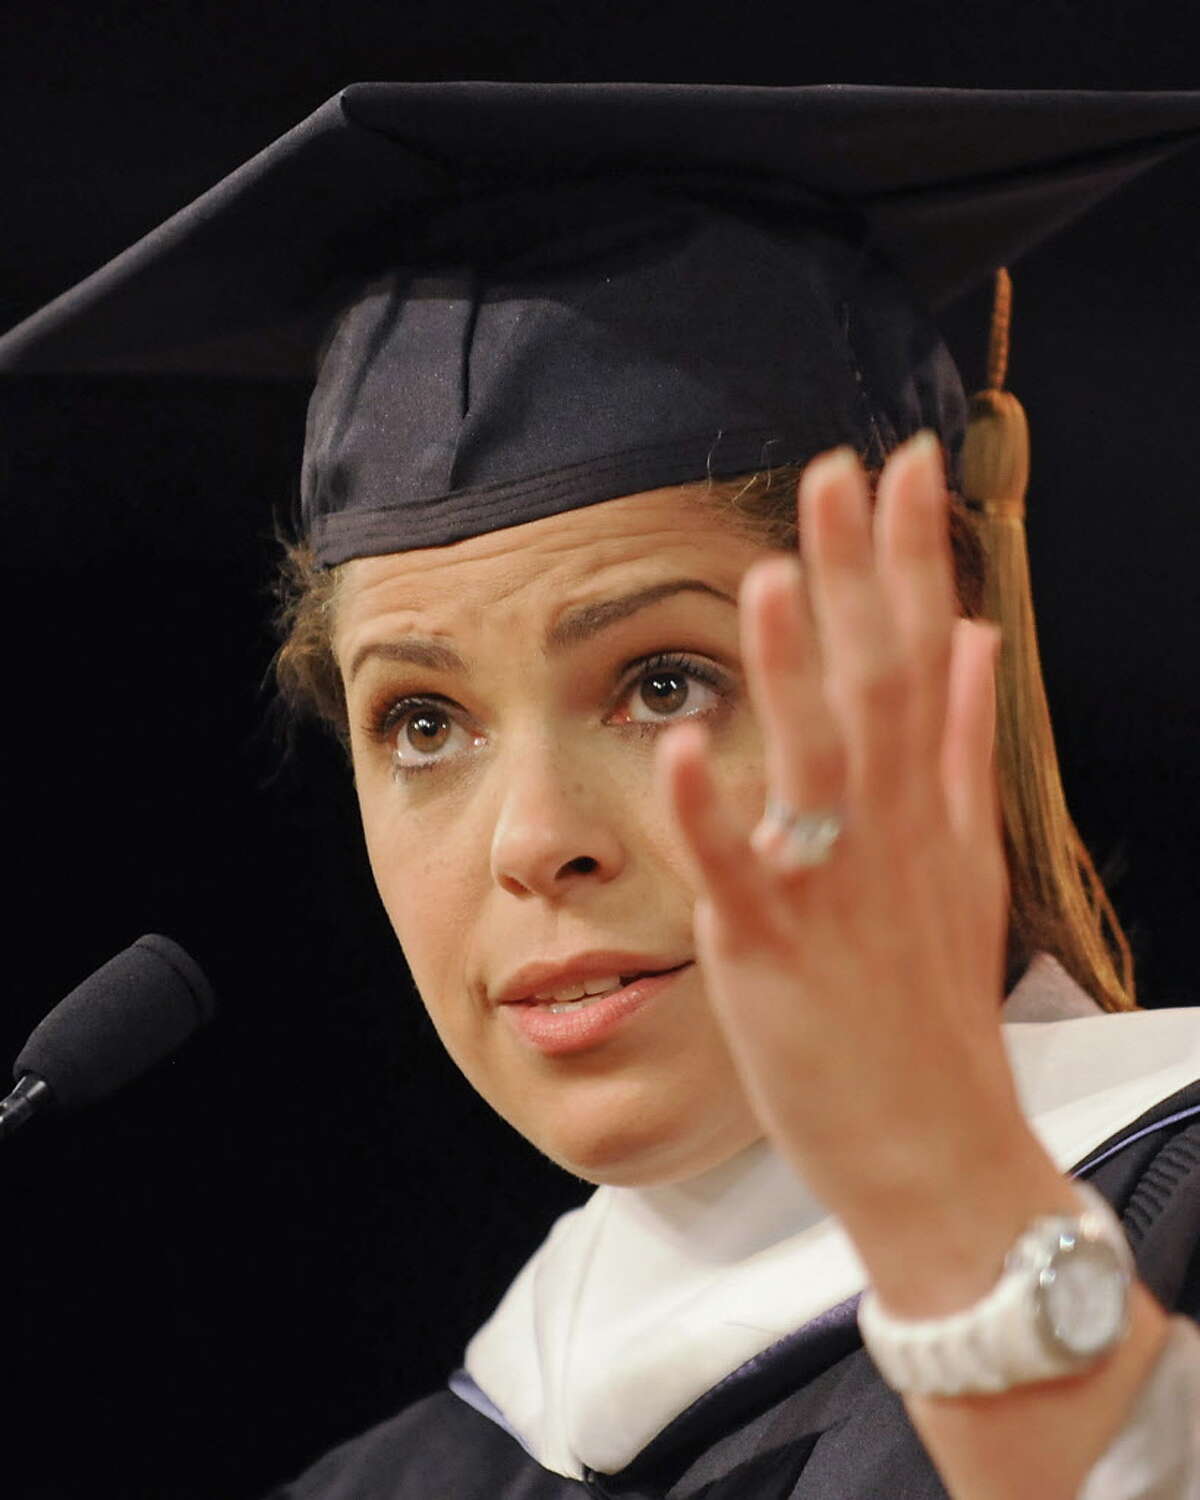 CNN anchor Soledad O'Brien gives the keynote address at Excelsior College's commencement at Empire State Plaza Convention Center in Albany on July 10, 2009.